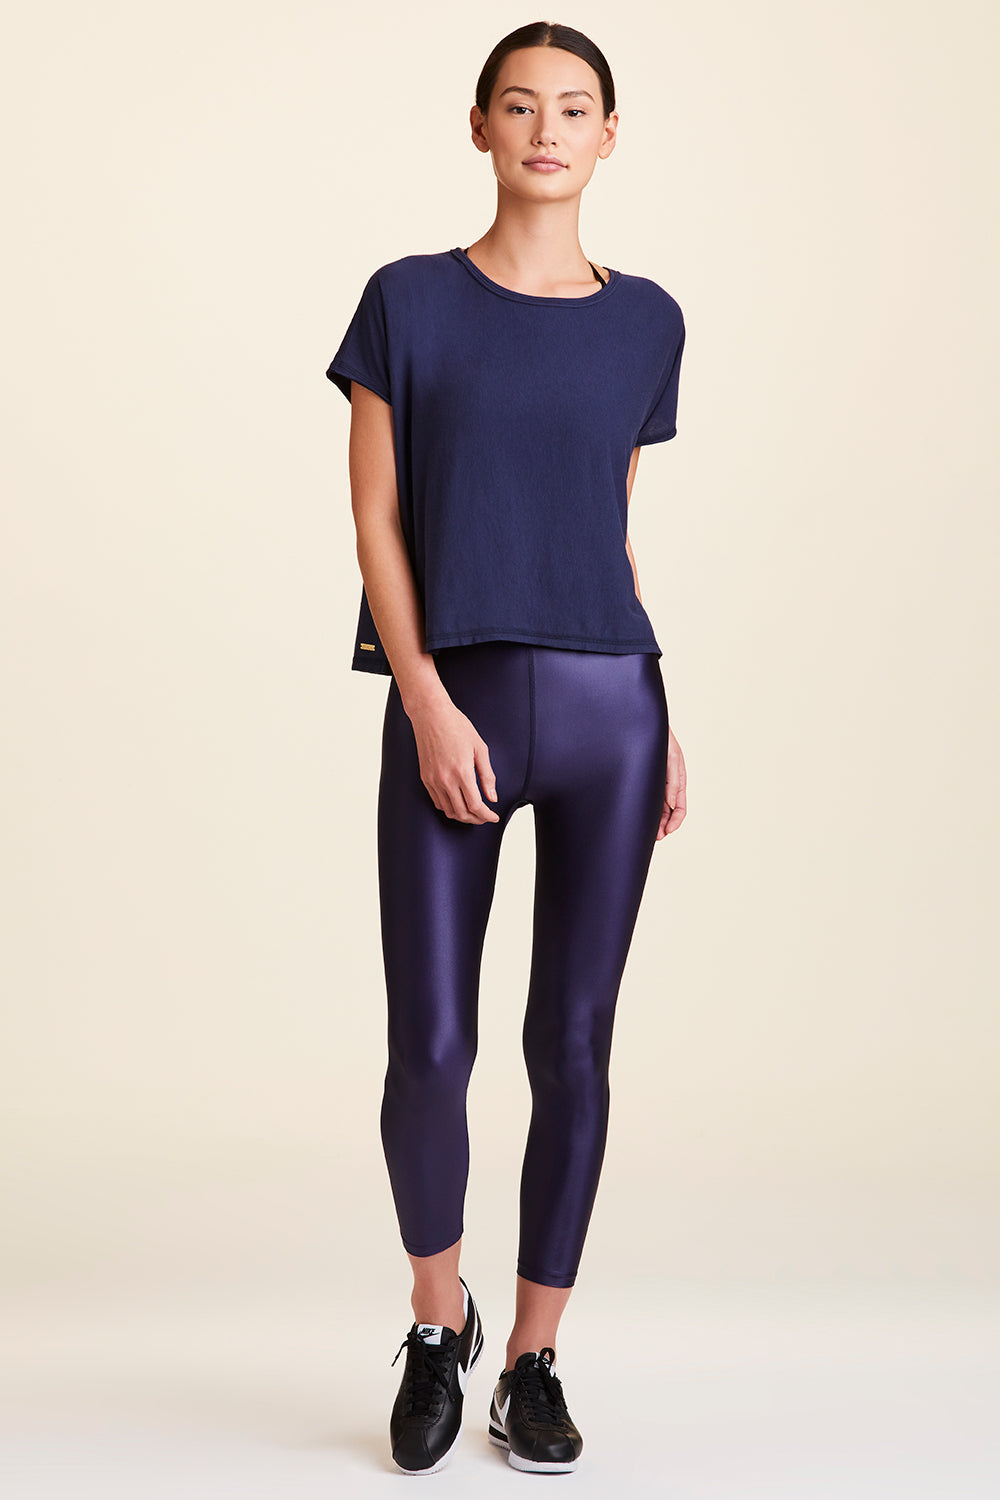 Front view of Alala Women's Luxury Athleisure super-soft tee in solid Navy